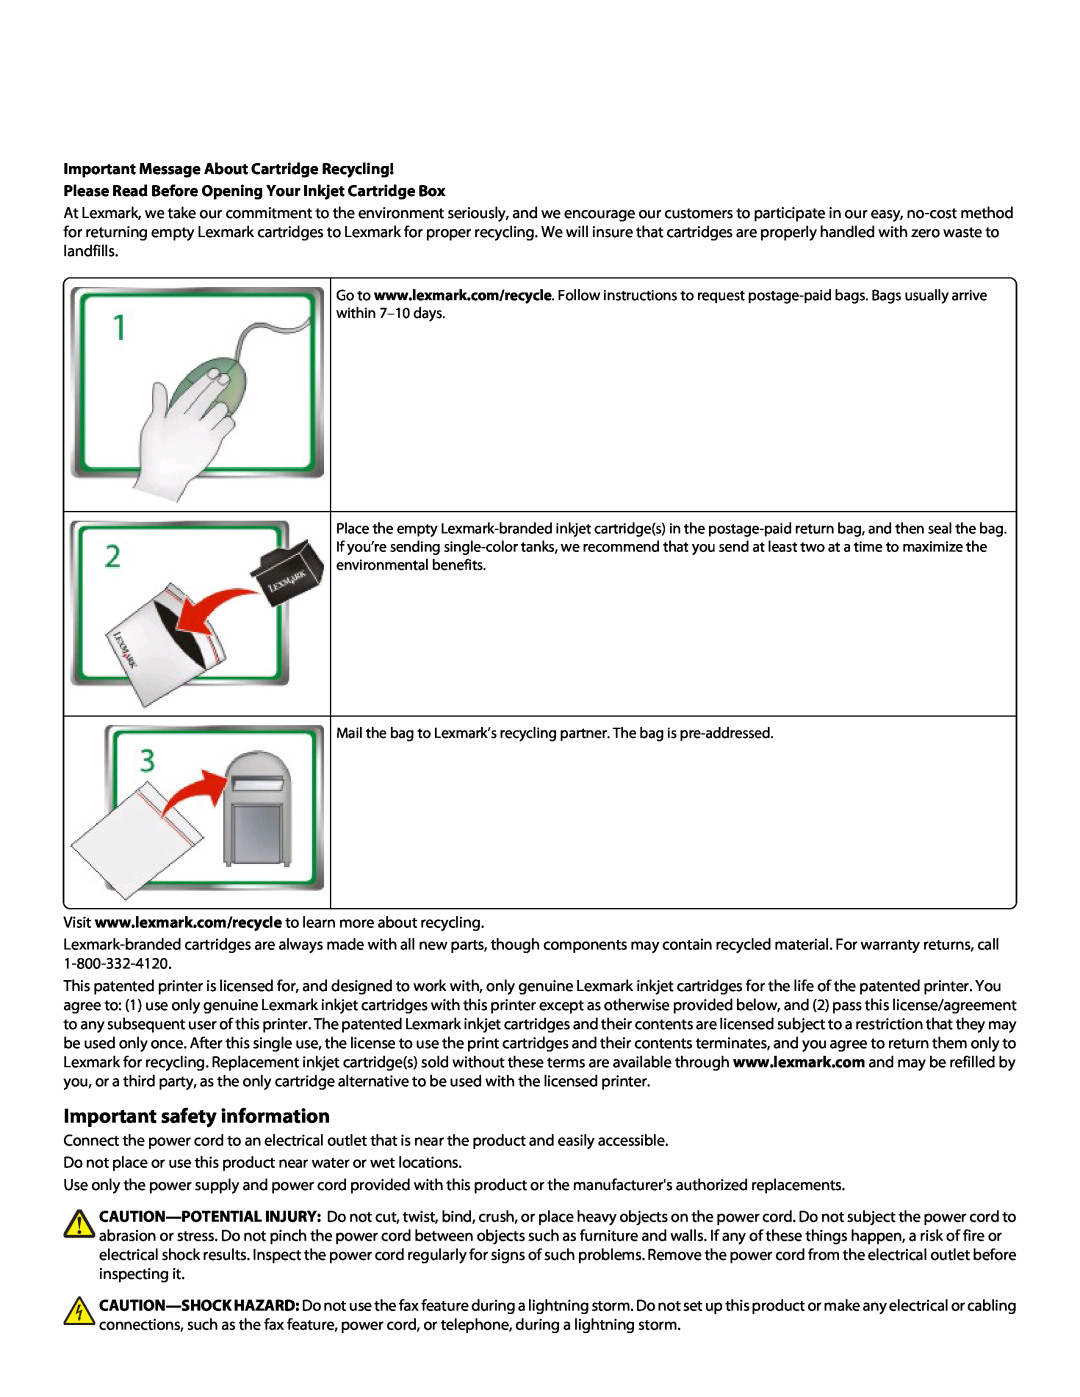 Lexmark S300 manual Important safety information, Important Message About Cartridge Recycling 